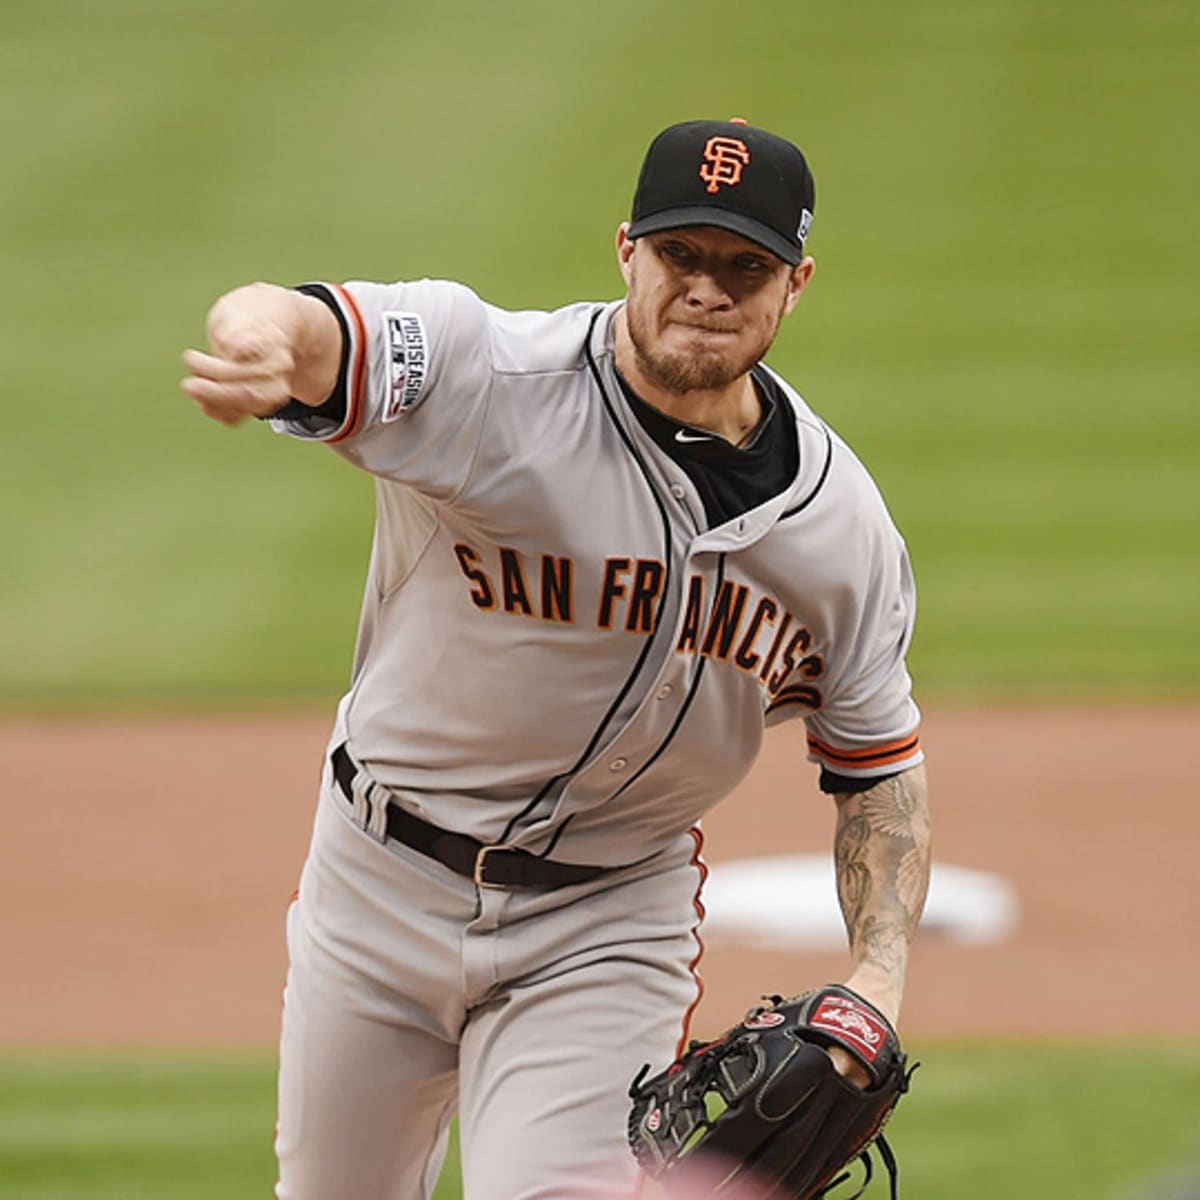 Jake Peavy's effective performance against the Nationals gives the Giants a  1-0 lead in the N.L. Division Series - Sports Illustrated